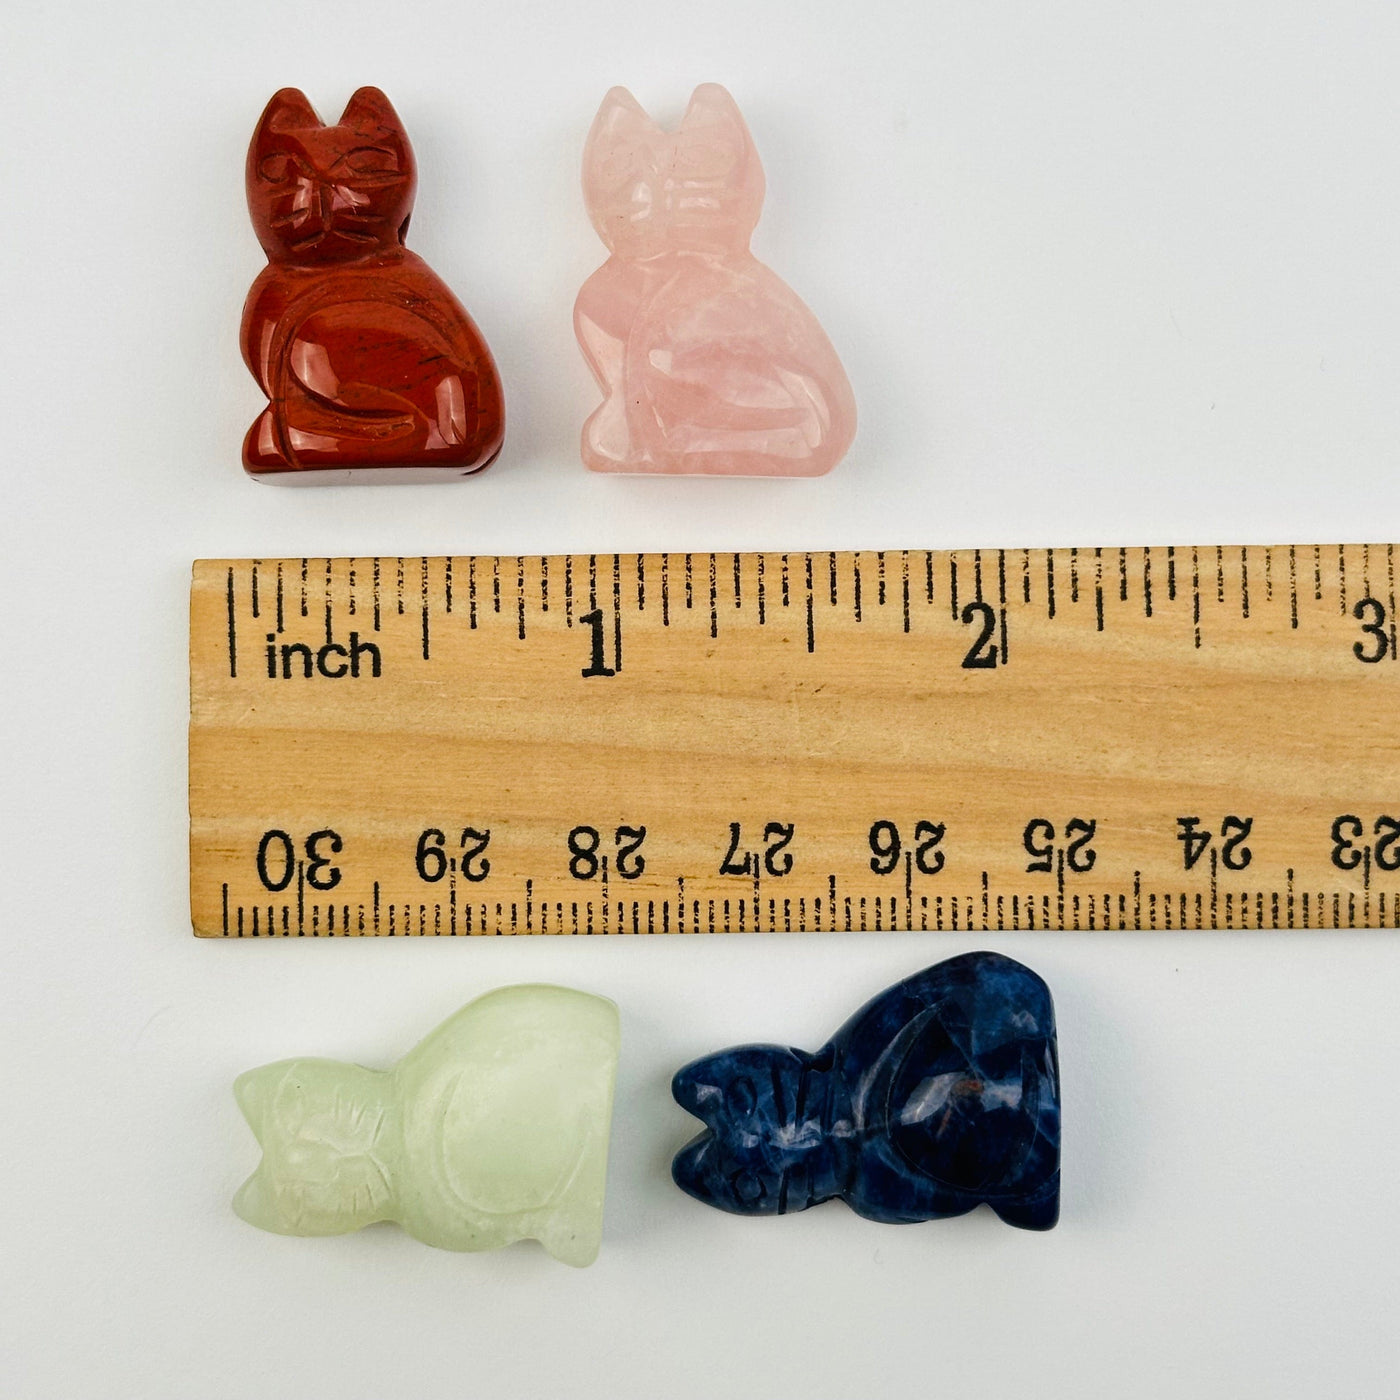 cat beads next to a ruler for size reference 